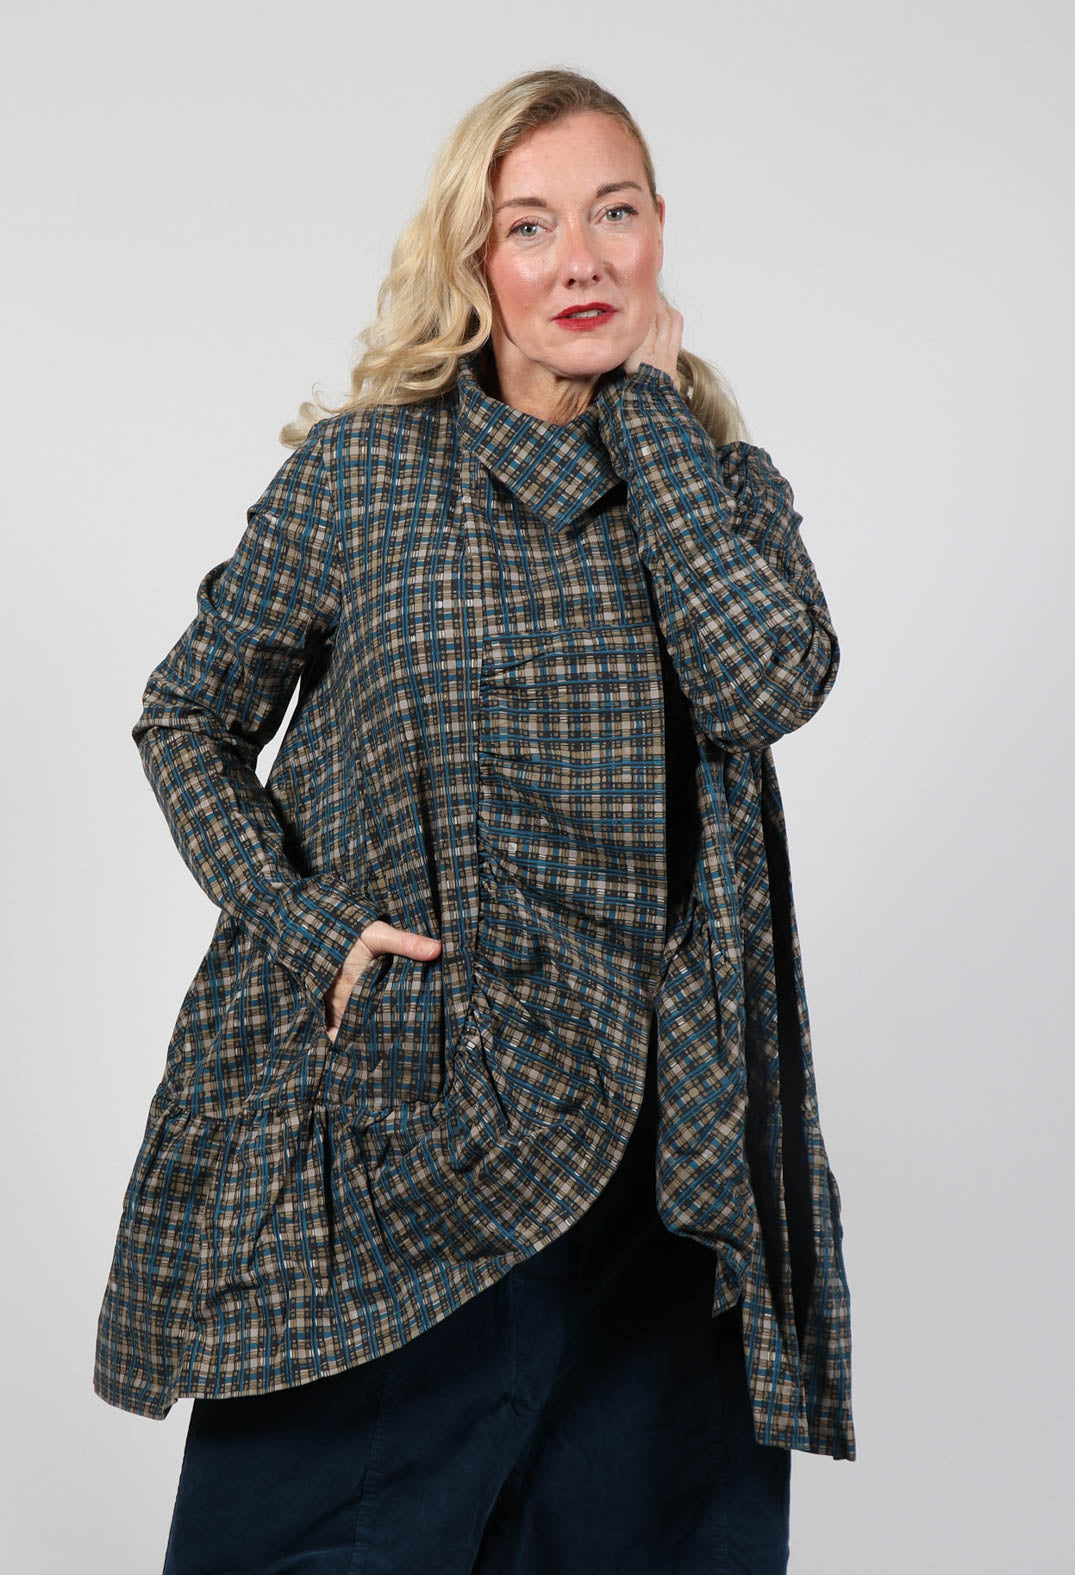 Jacket with High Low Peplum Hem in Ink Check